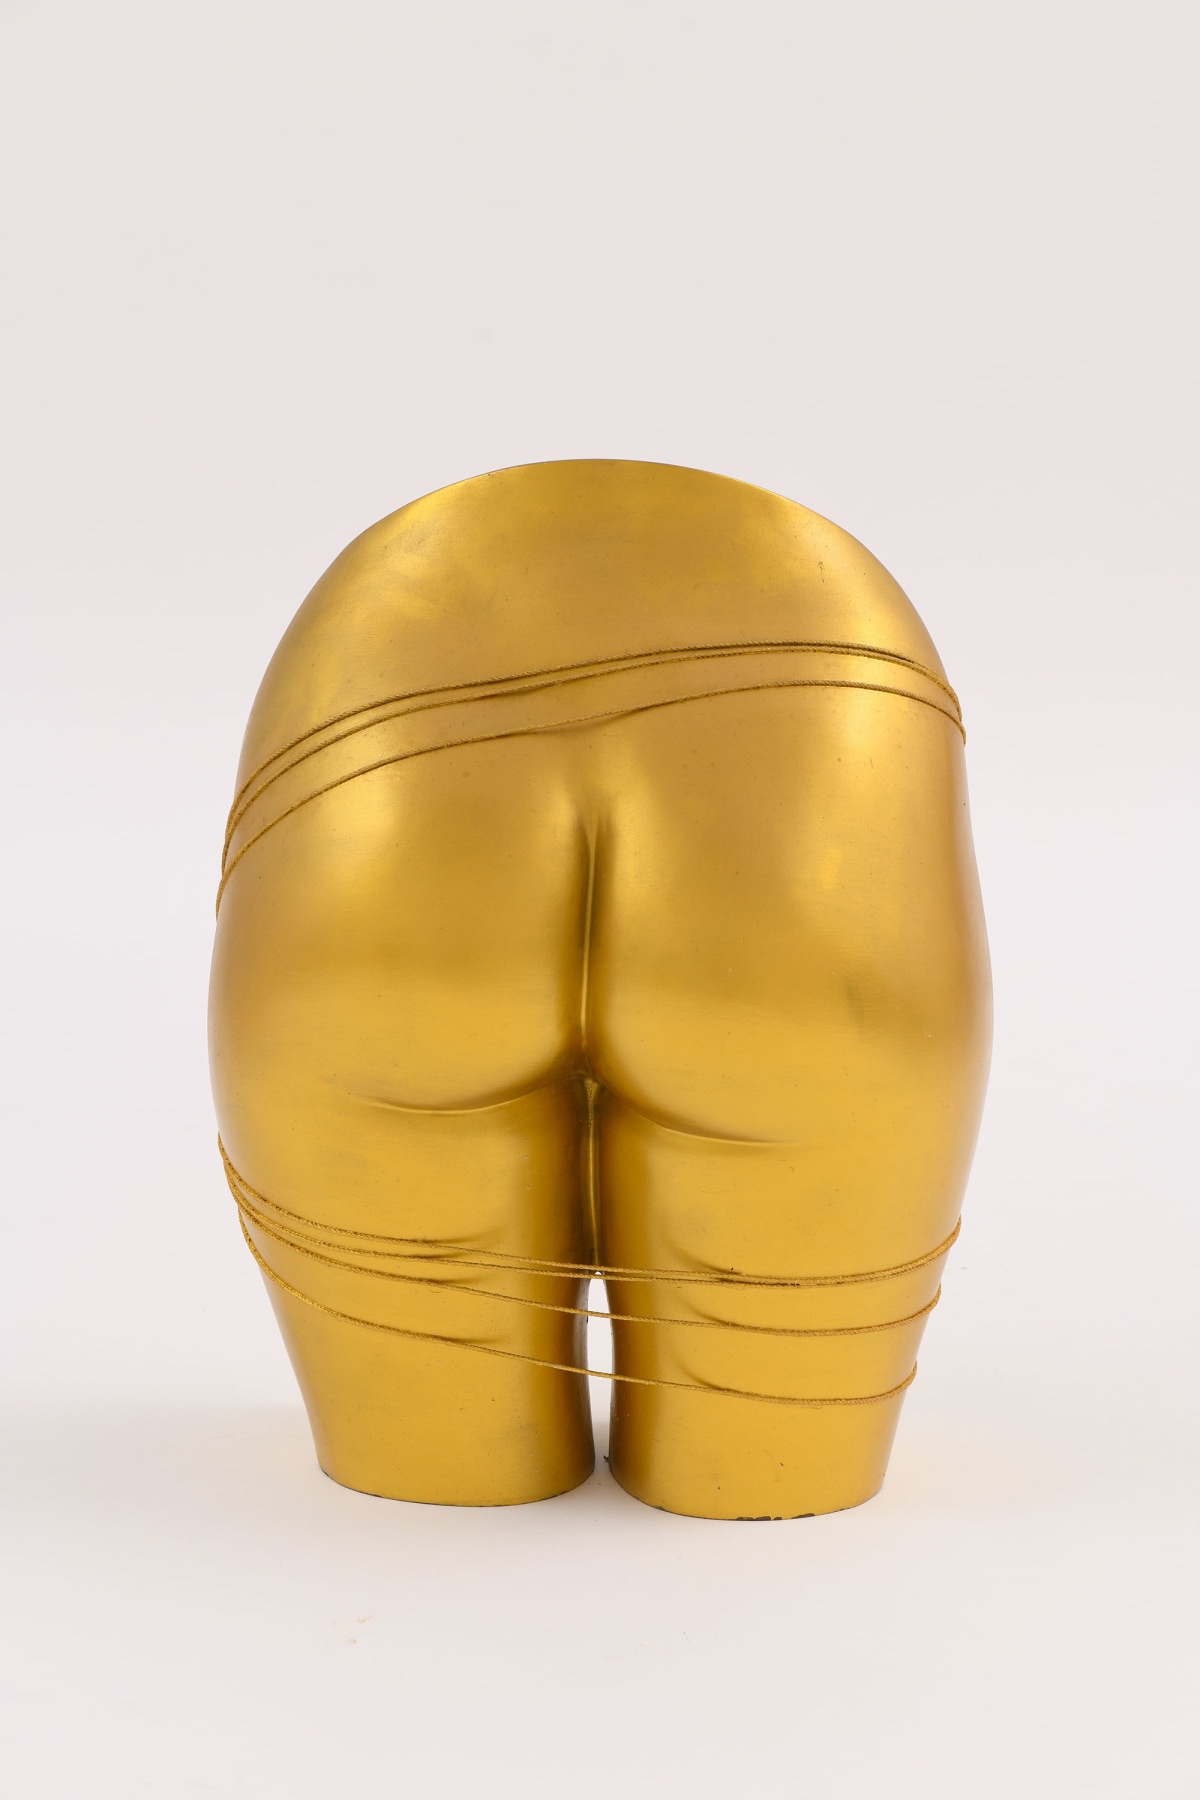 Seung-taek Lee

&amp;ldquo;Hip&amp;rdquo;, 1962

Gold paint, wire on bronze

23 x 15 3/4 x 8 1/2 inches

58 x 40 x 22 cm

LEE 30

$110,000